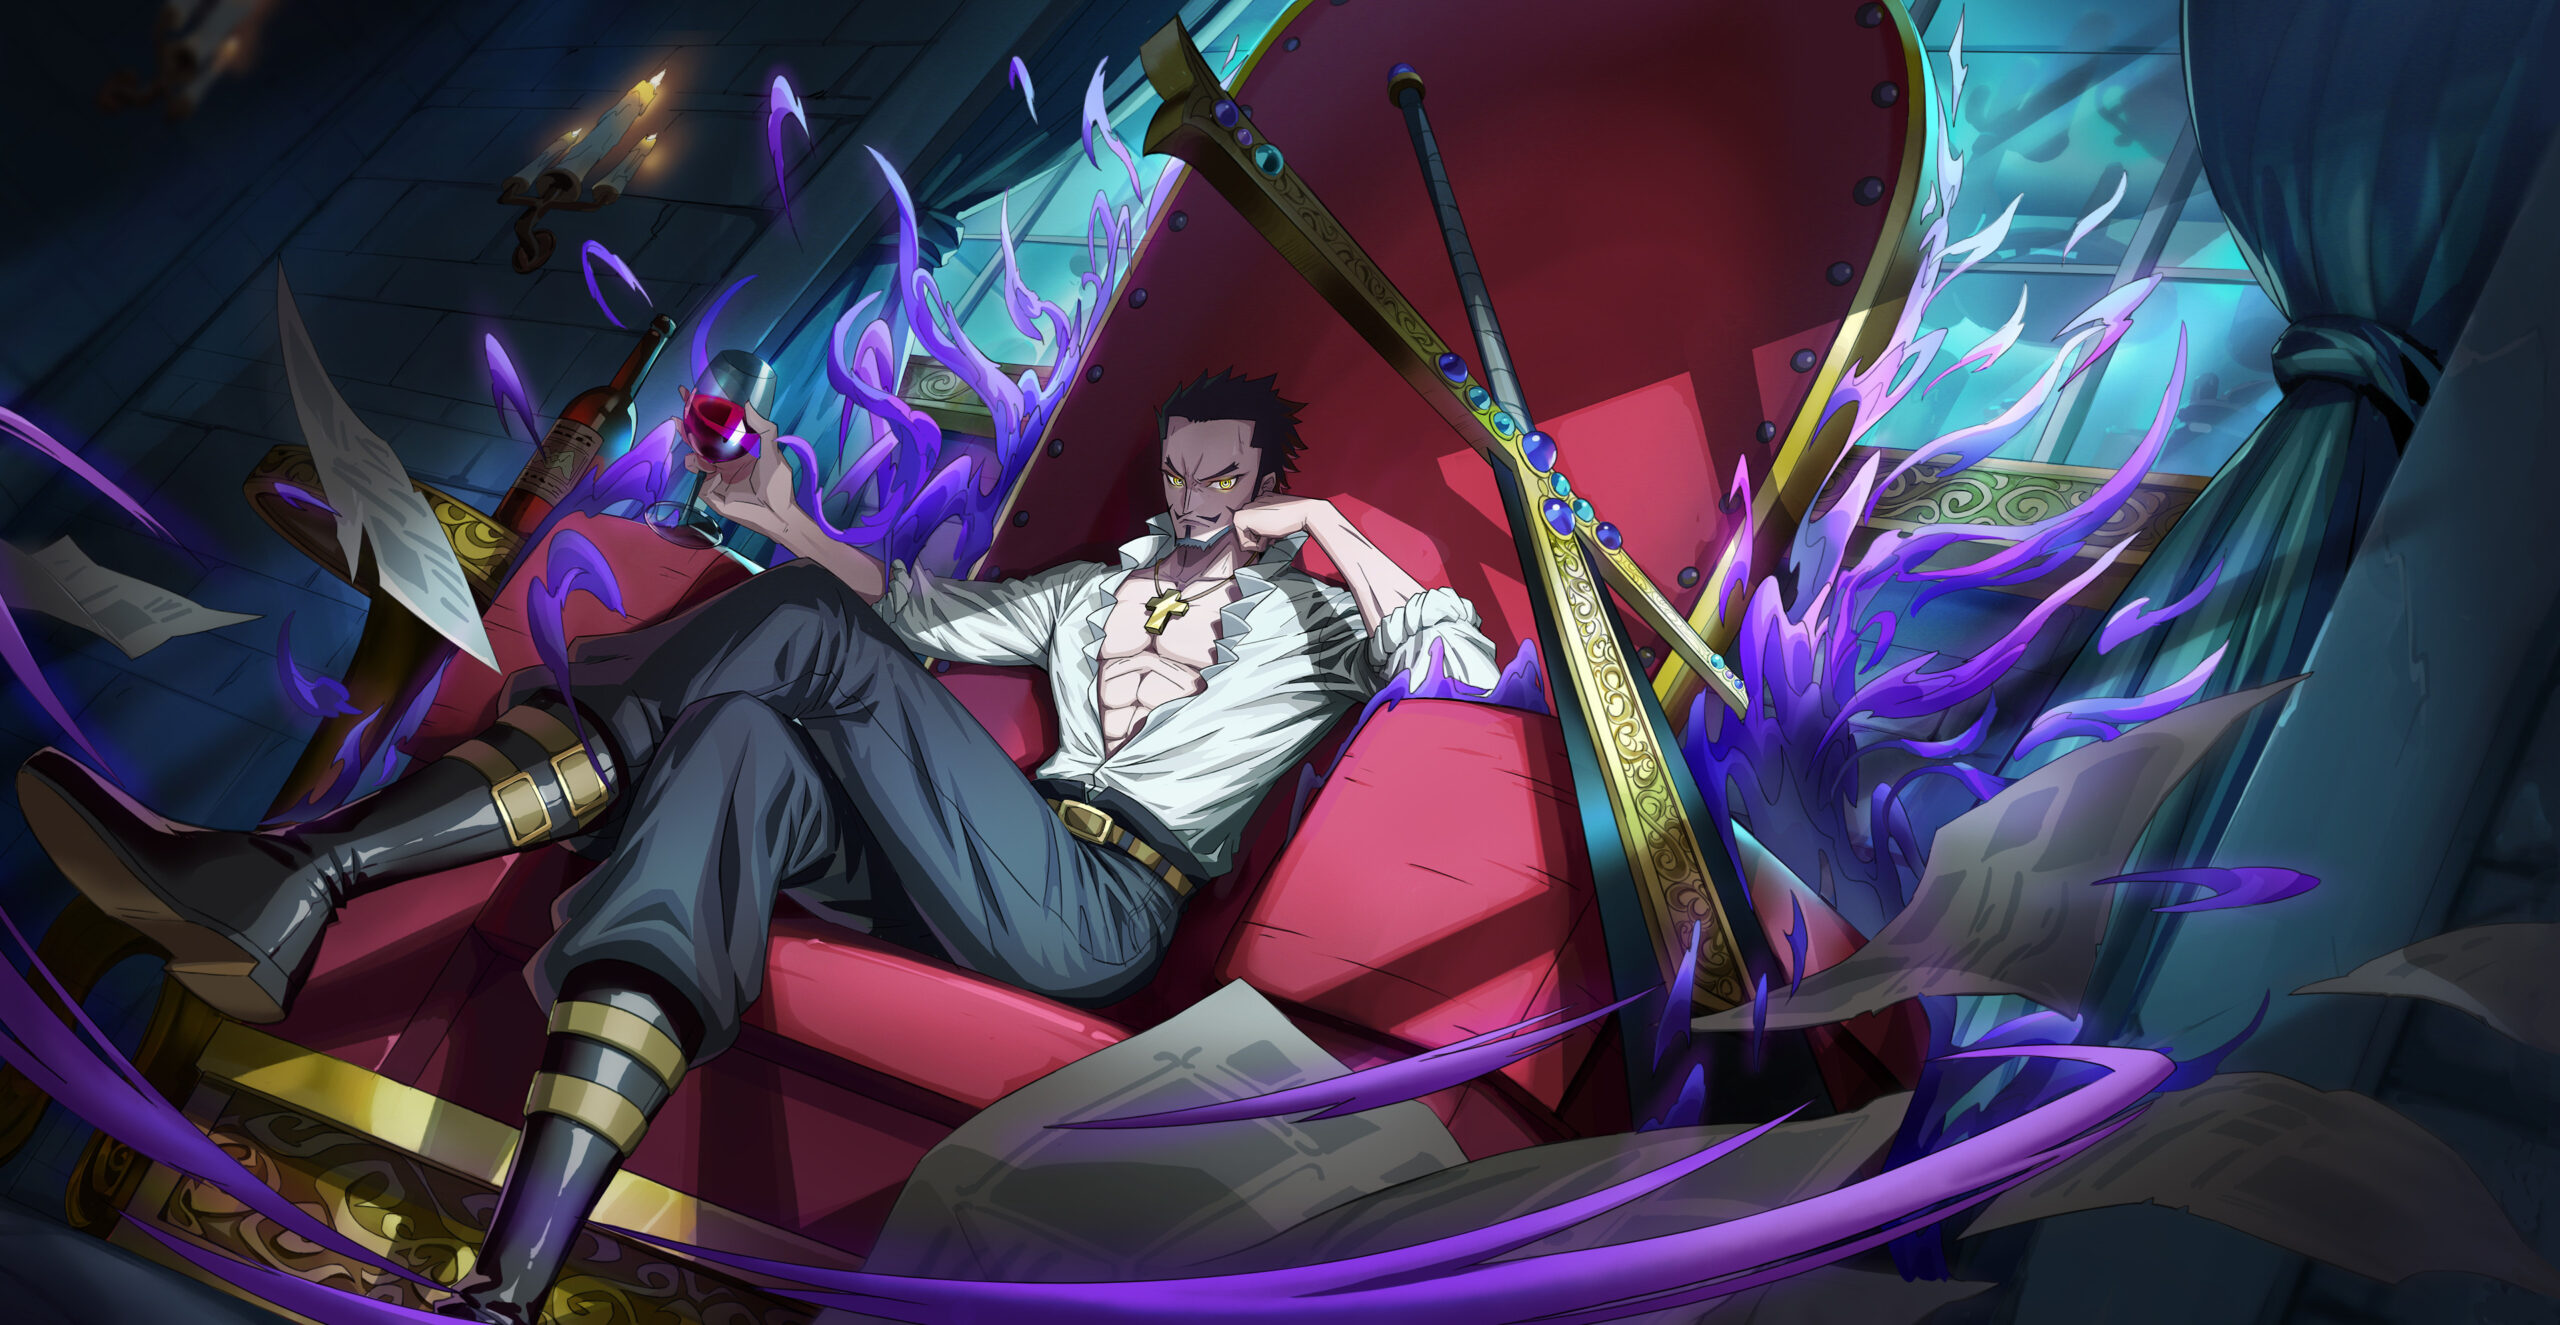 Breaking News in One Piece World: Could Mihawk's Family Ties Reveal the Anime's Biggest Secret?